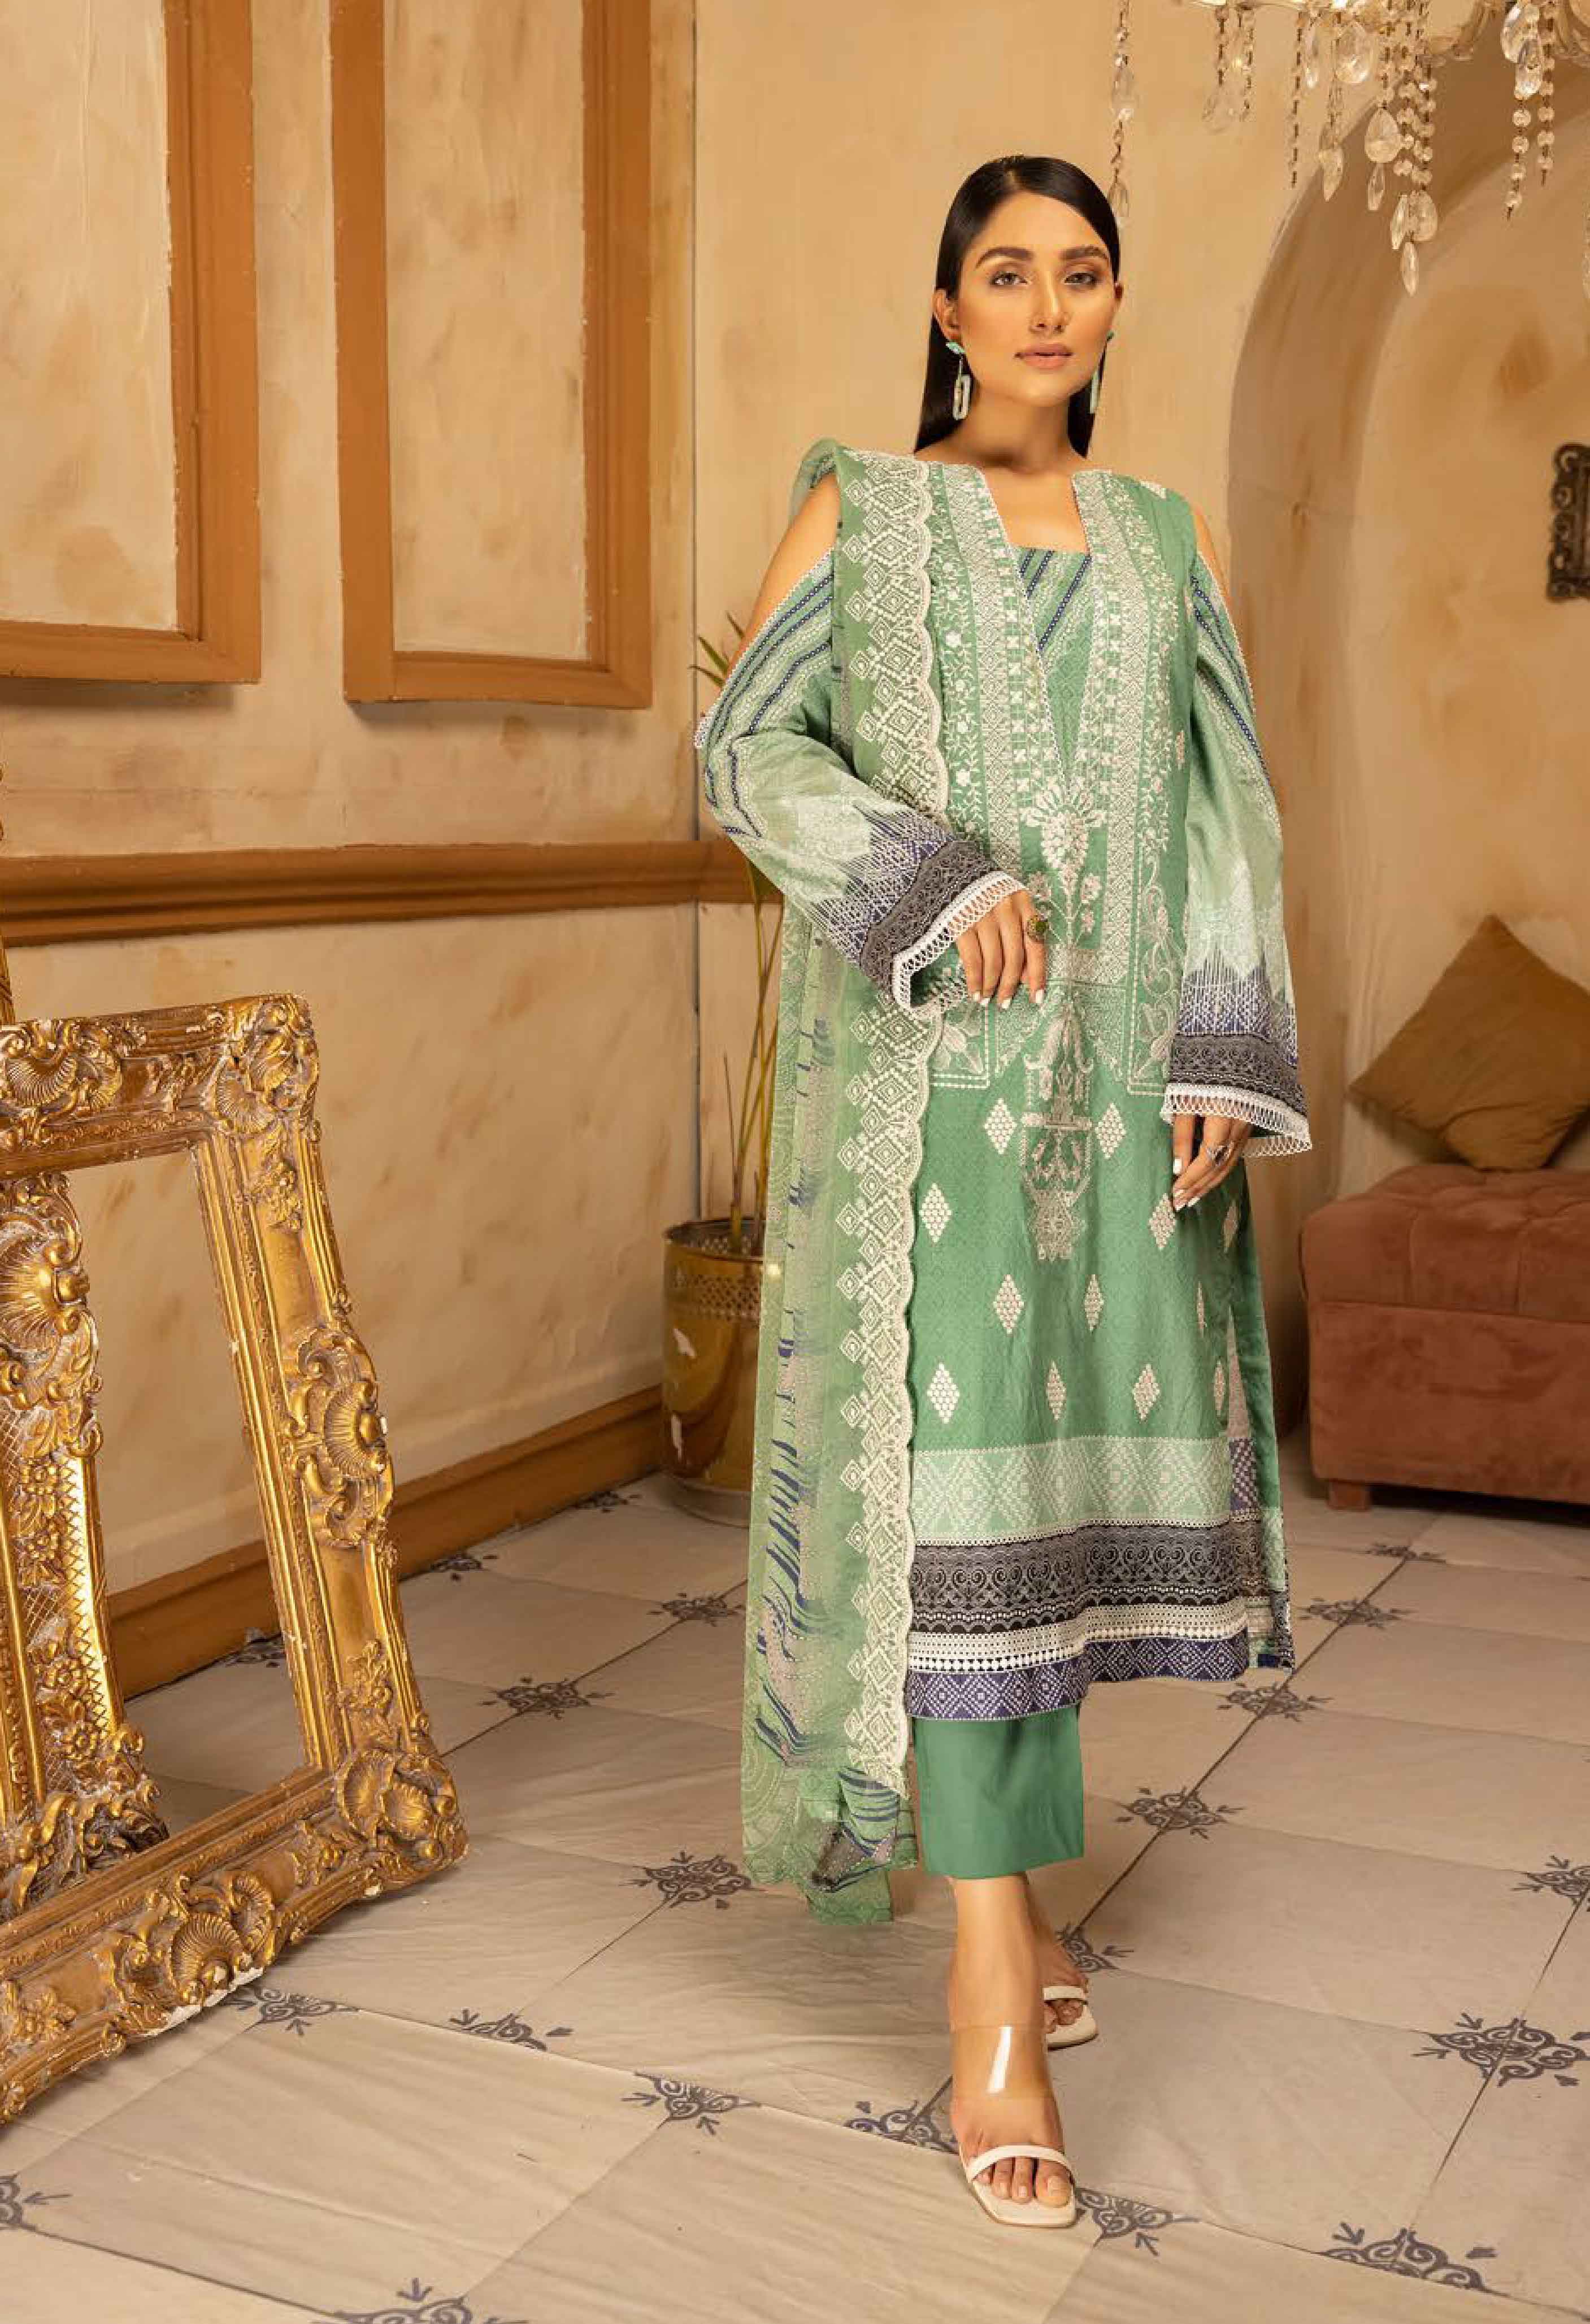 Heena by Simrans Readymade 3 Piece Lawn Outfit Green DesiP 